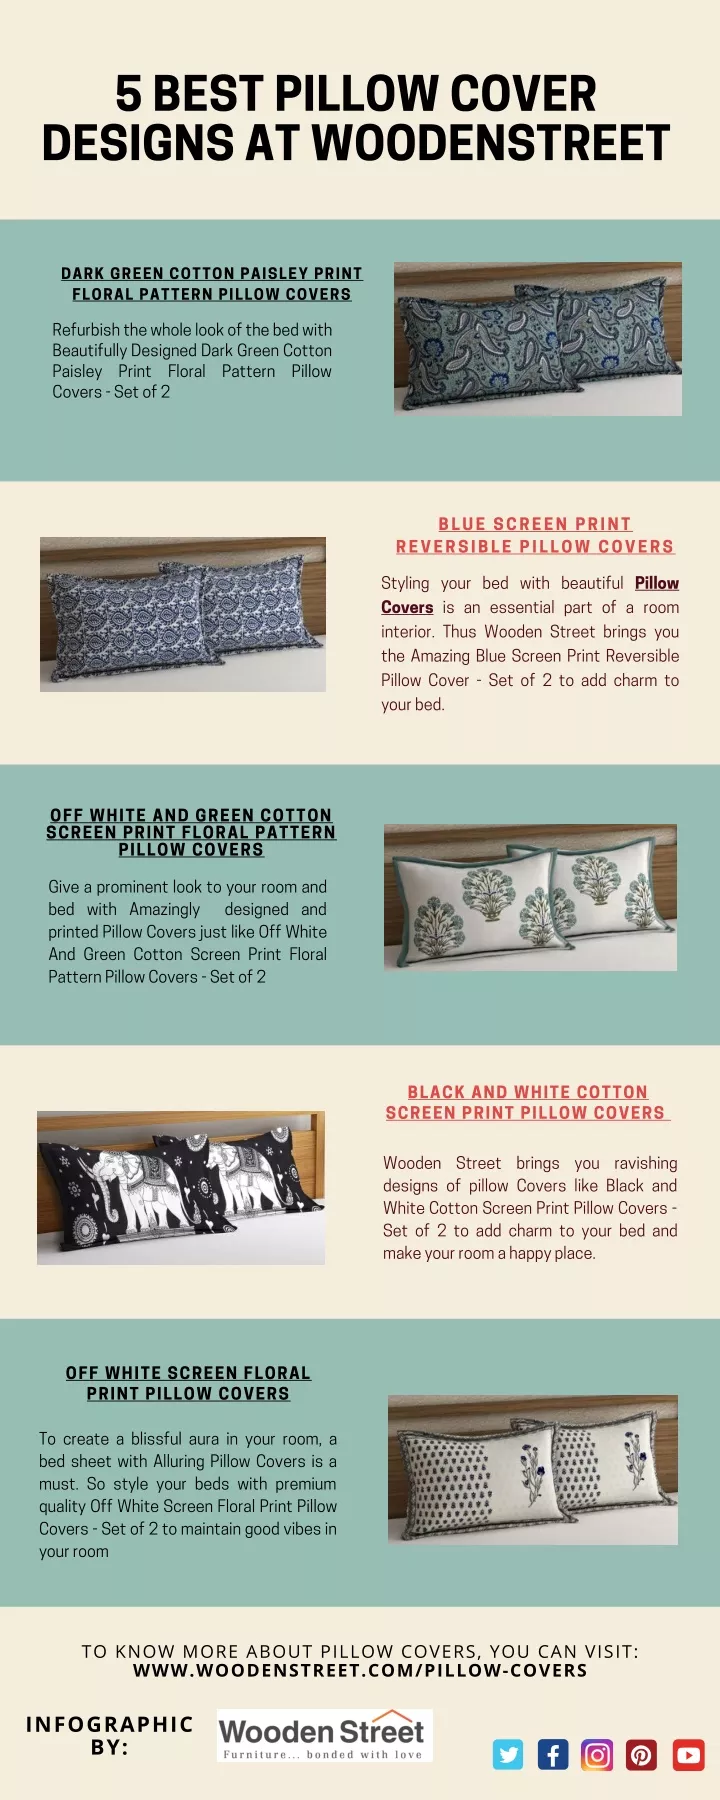 5 best pillow cover designs at woodenstreet